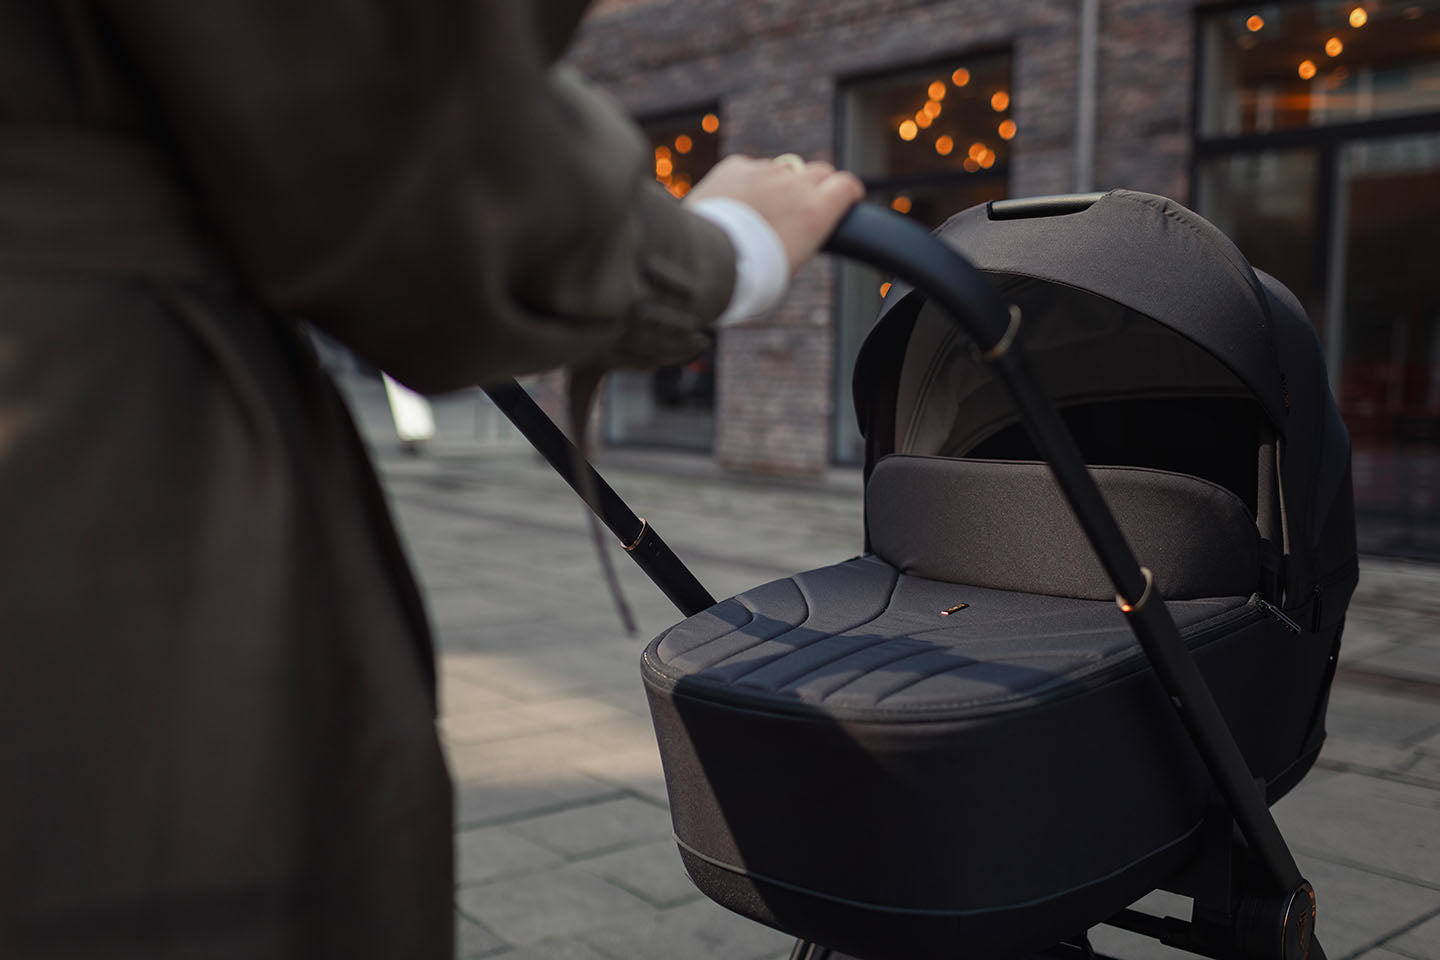 A person pushing a Venicci Claro 3-in-1 Travel System in Noir black color